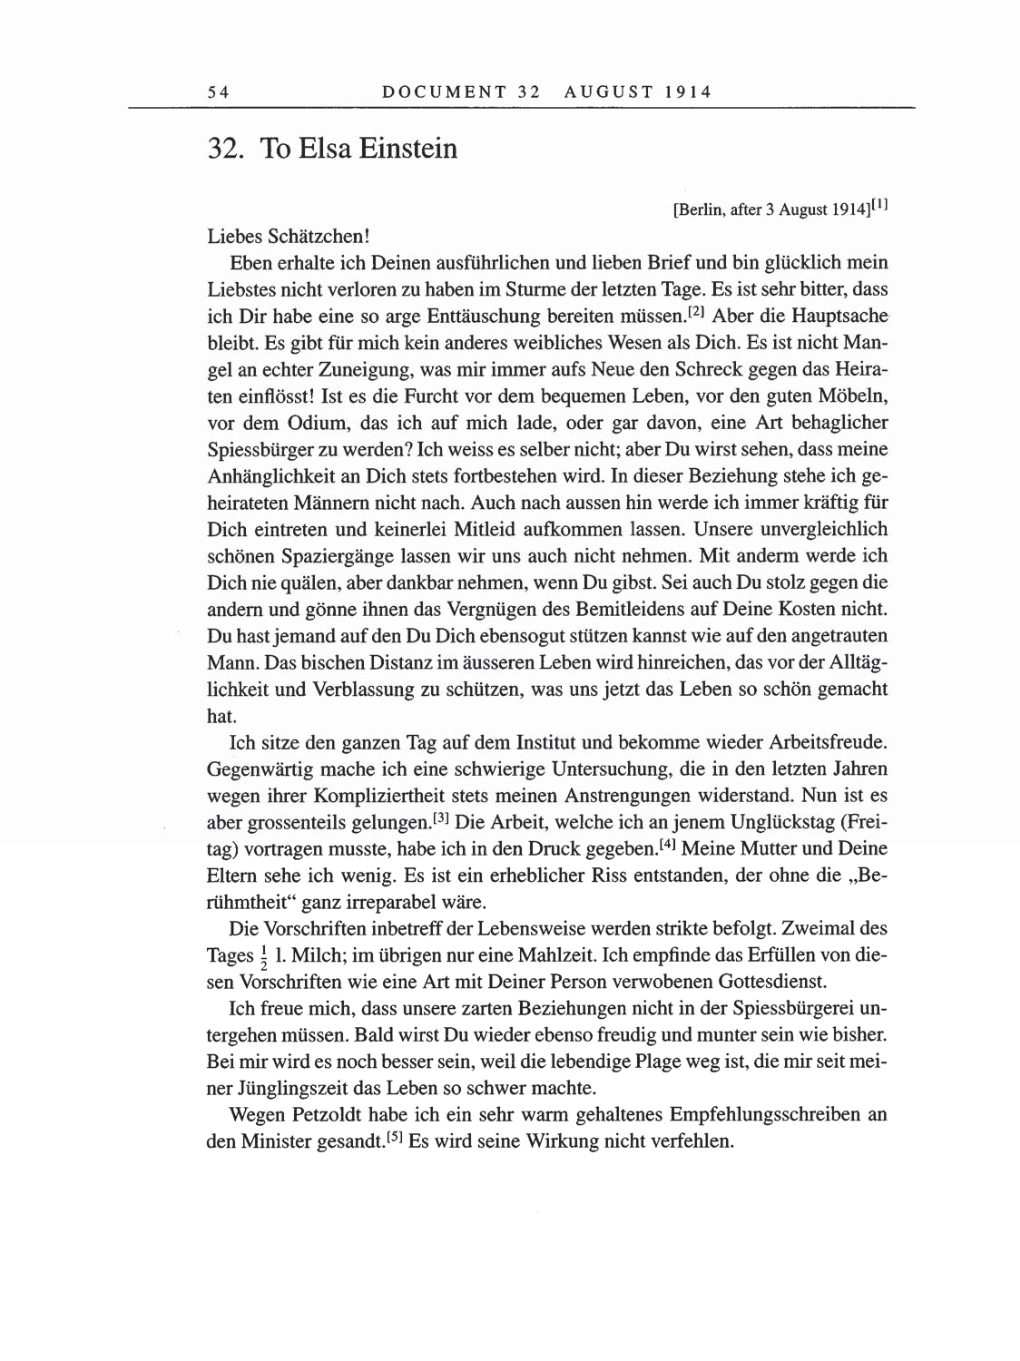 Volume 8, Part A: The Berlin Years: Correspondence 1914-1917 page 54